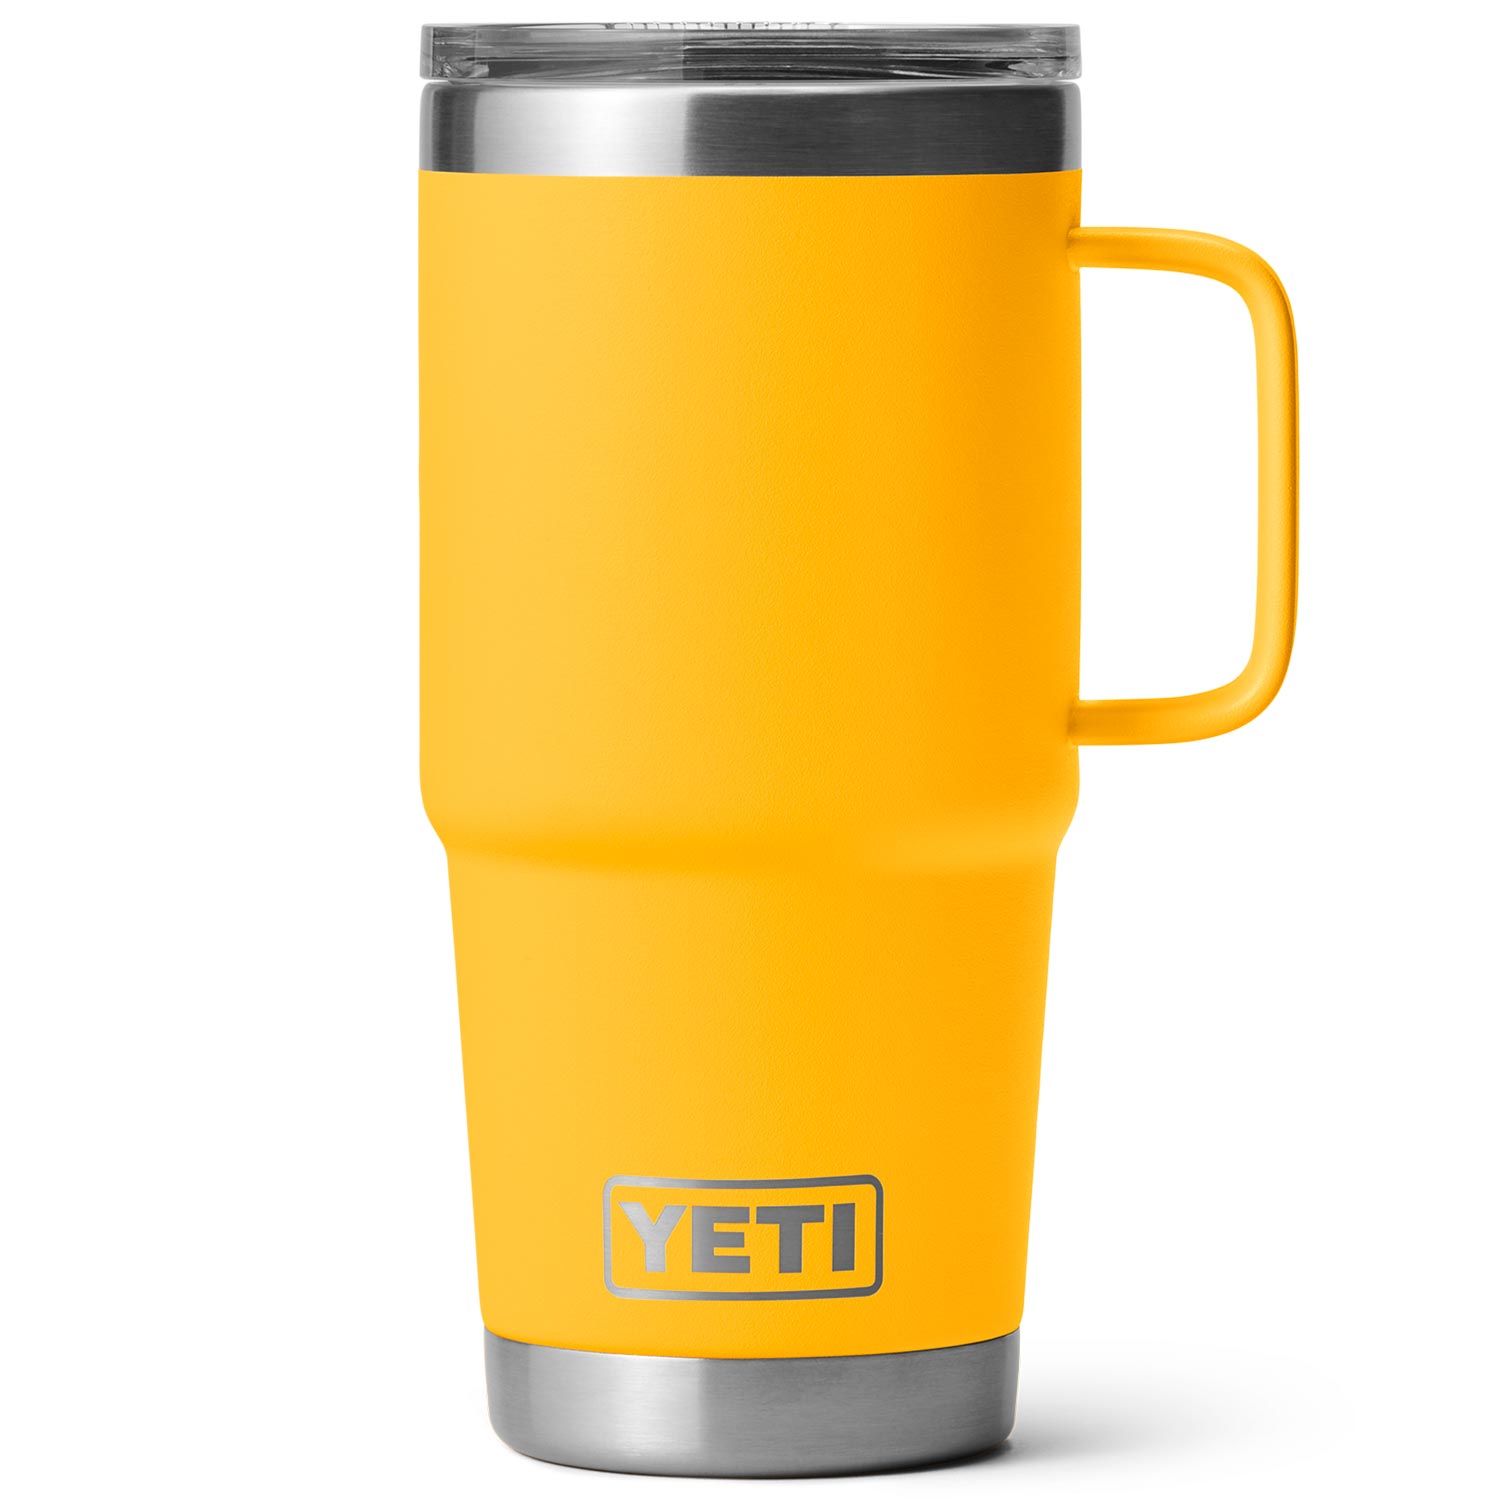  YETI Rambler 20 oz Travel Mug, Stainless Steel, Vacuum  Insulated with Stronghold Lid, Reef Blue: Home & Kitchen